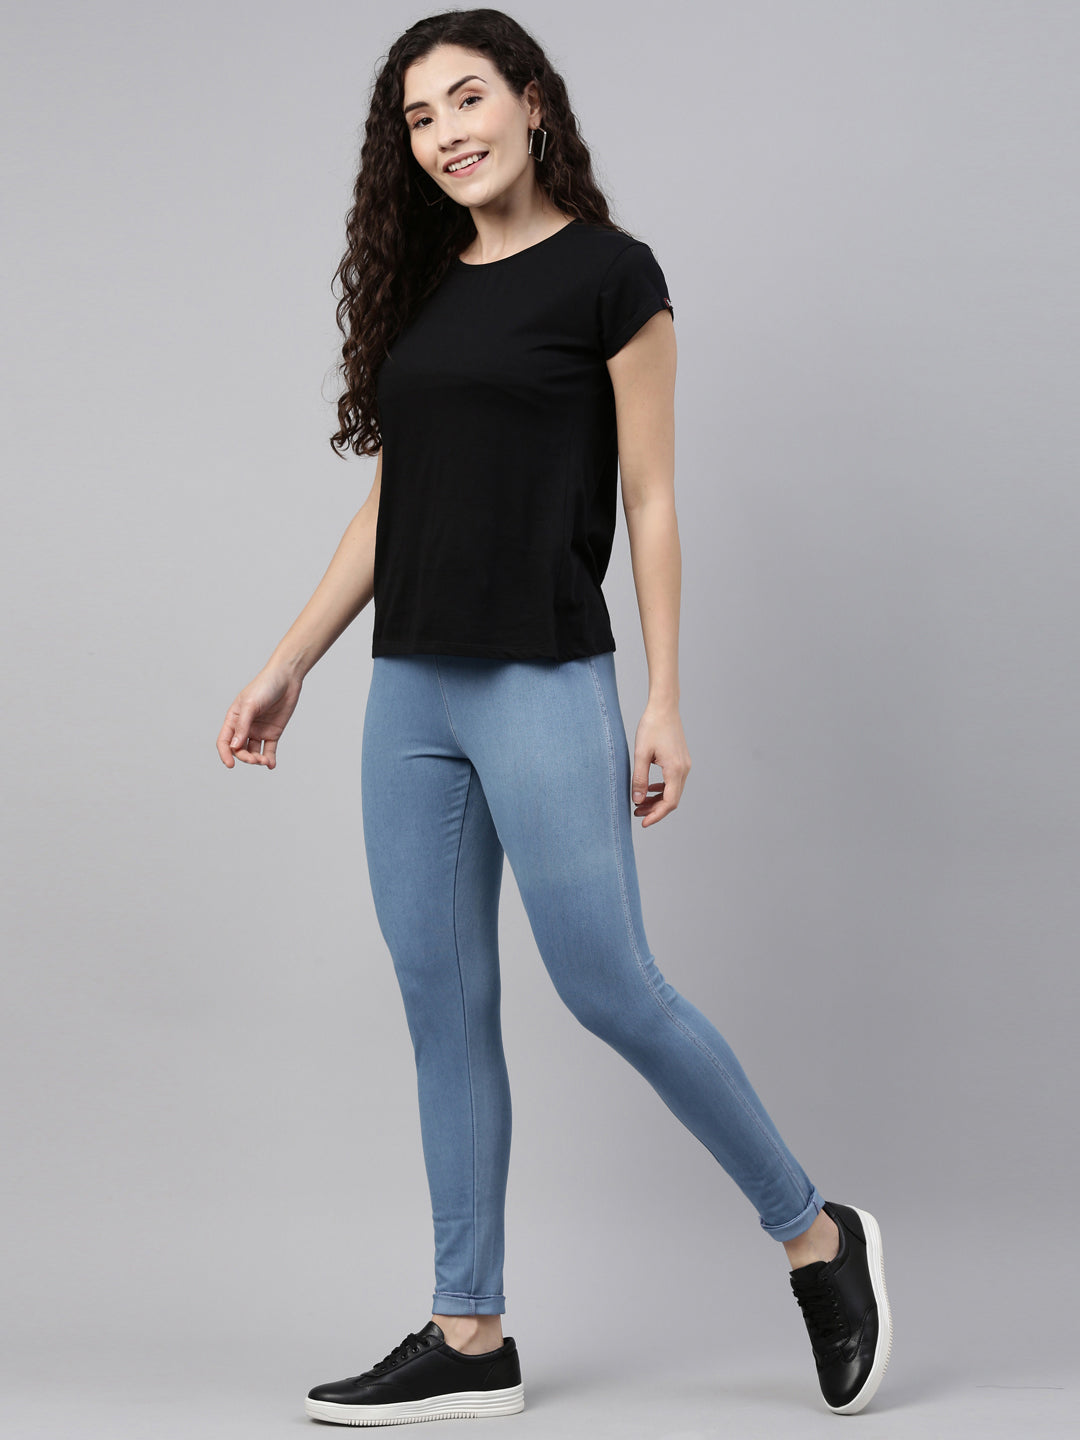 GO COLORS Blue Legging 360 stretch Denim in Bangalore at best price by  Colors Nest - Justdial